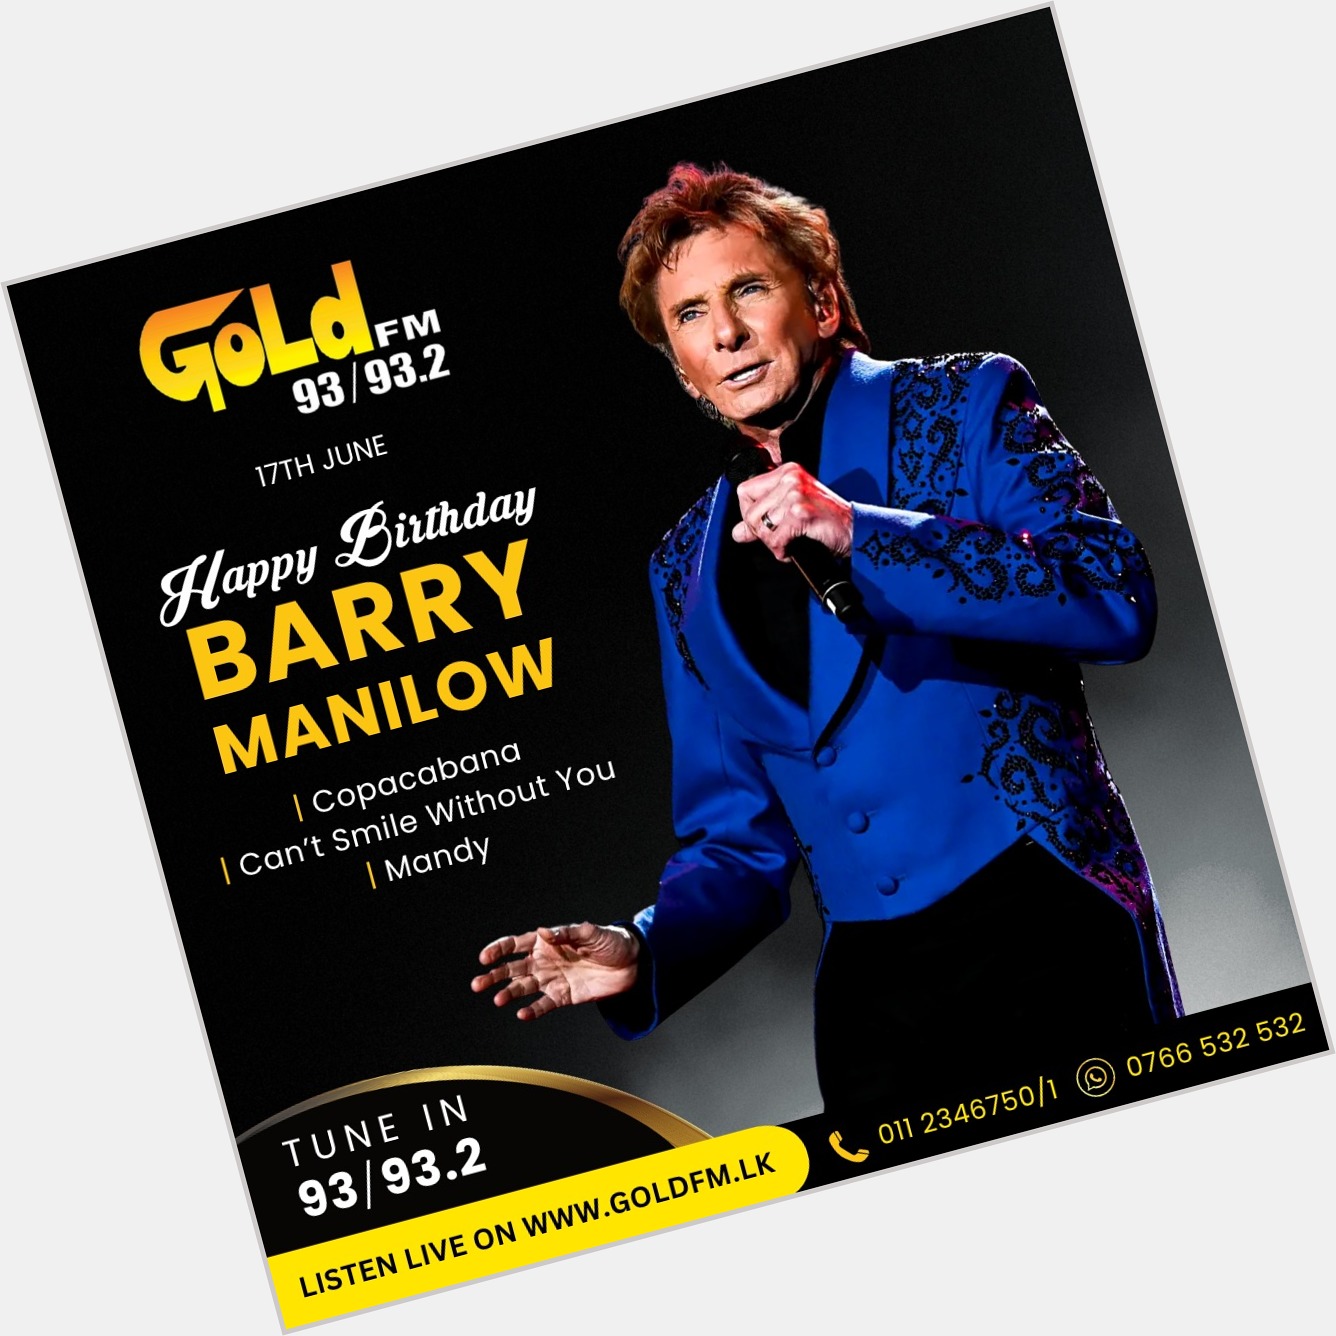 HAPPY BIRTHDAY TO BARRY MANILOW TUNE IN  93 / 93.2 Island wide    